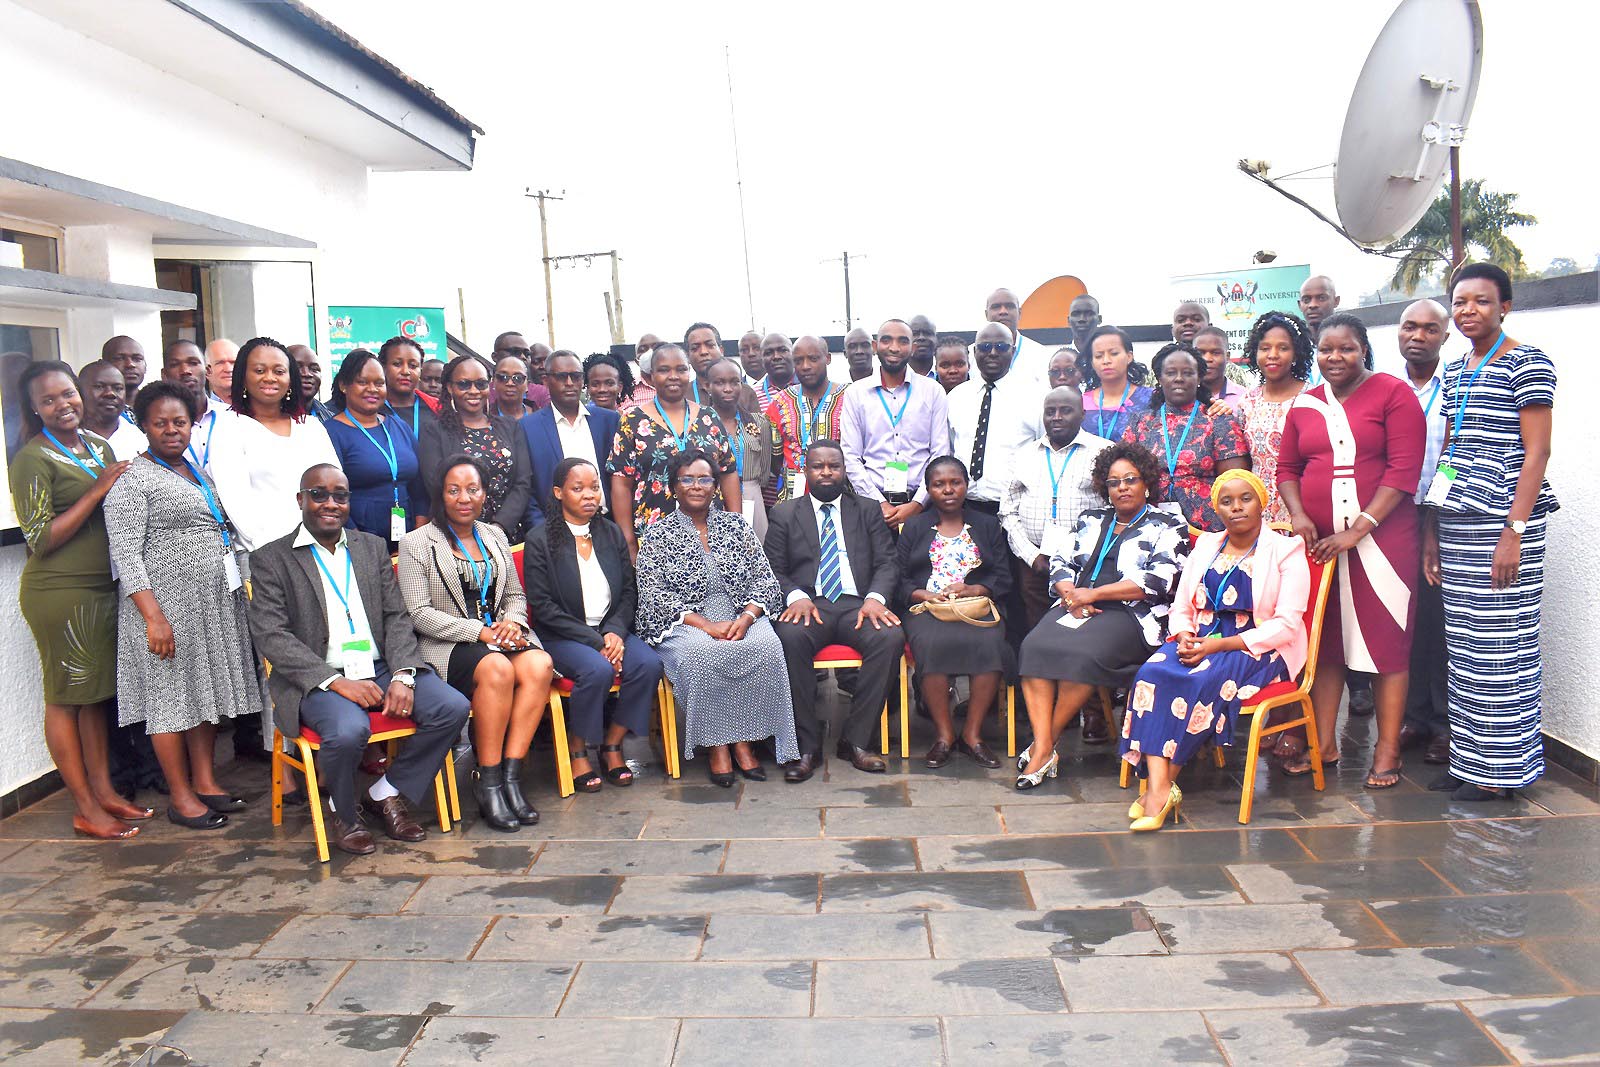 Participants in a group photo with the Senior Programme Officer, Royal Norwegian Embassy in Kampala, Ms Mary Mabweijano (seated 4th L); the Deputy Director DRGT, Prof. Robert Wamala (seated 4th R); the Principal of CAES, Prof. Gorettie Nabanoga (seated 2nd L); and the Coordinator of the SET project, Prof. Frank Mugagga at the workshop at Laico Lake Victoria Hotel in Entebbe.